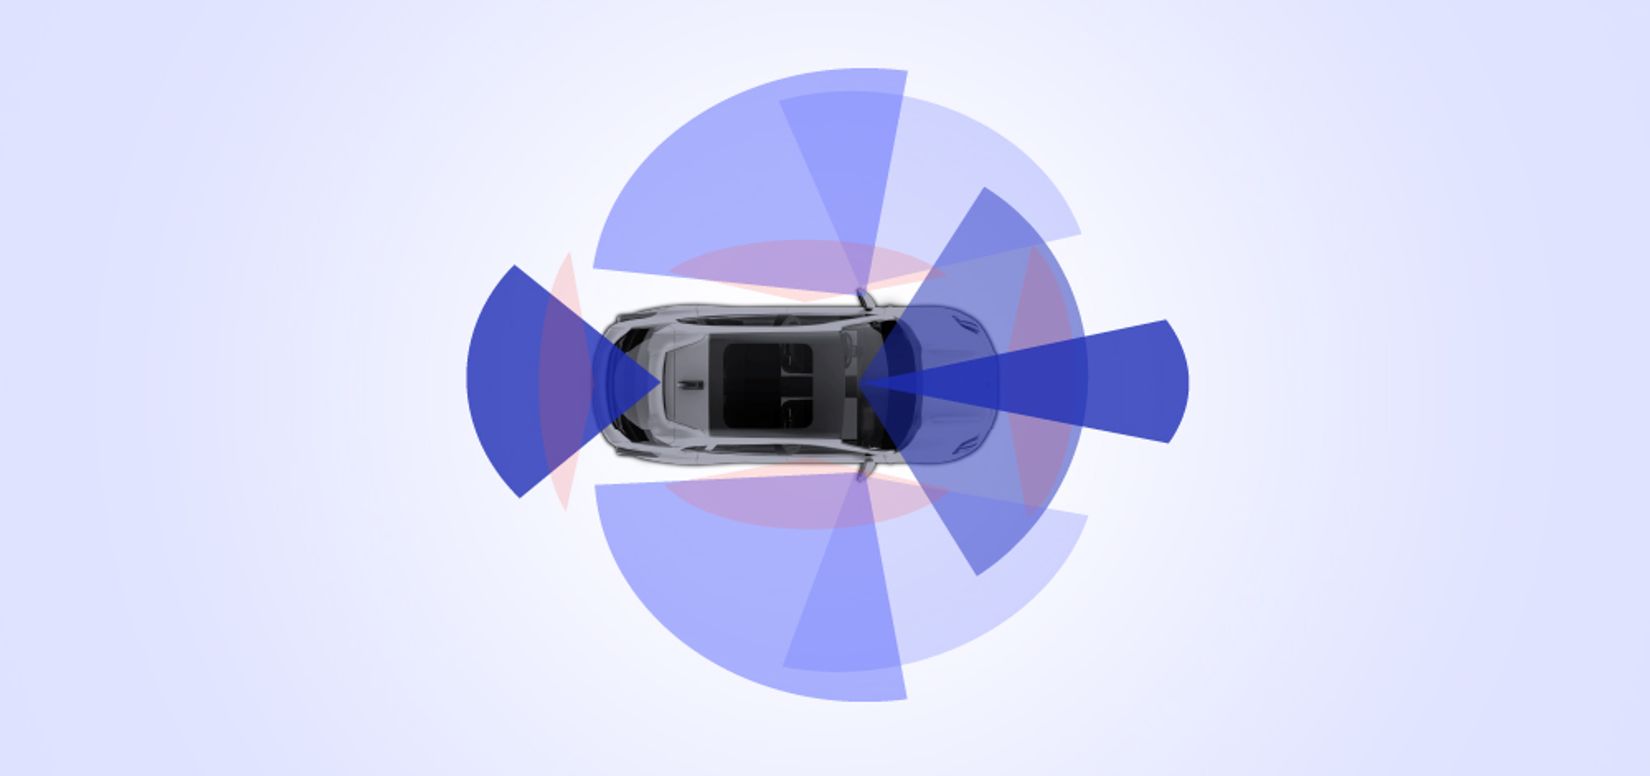 Mobileye's surround-view camera array provides 360-degree computer-vision capabilities for advanced mobility solutions.